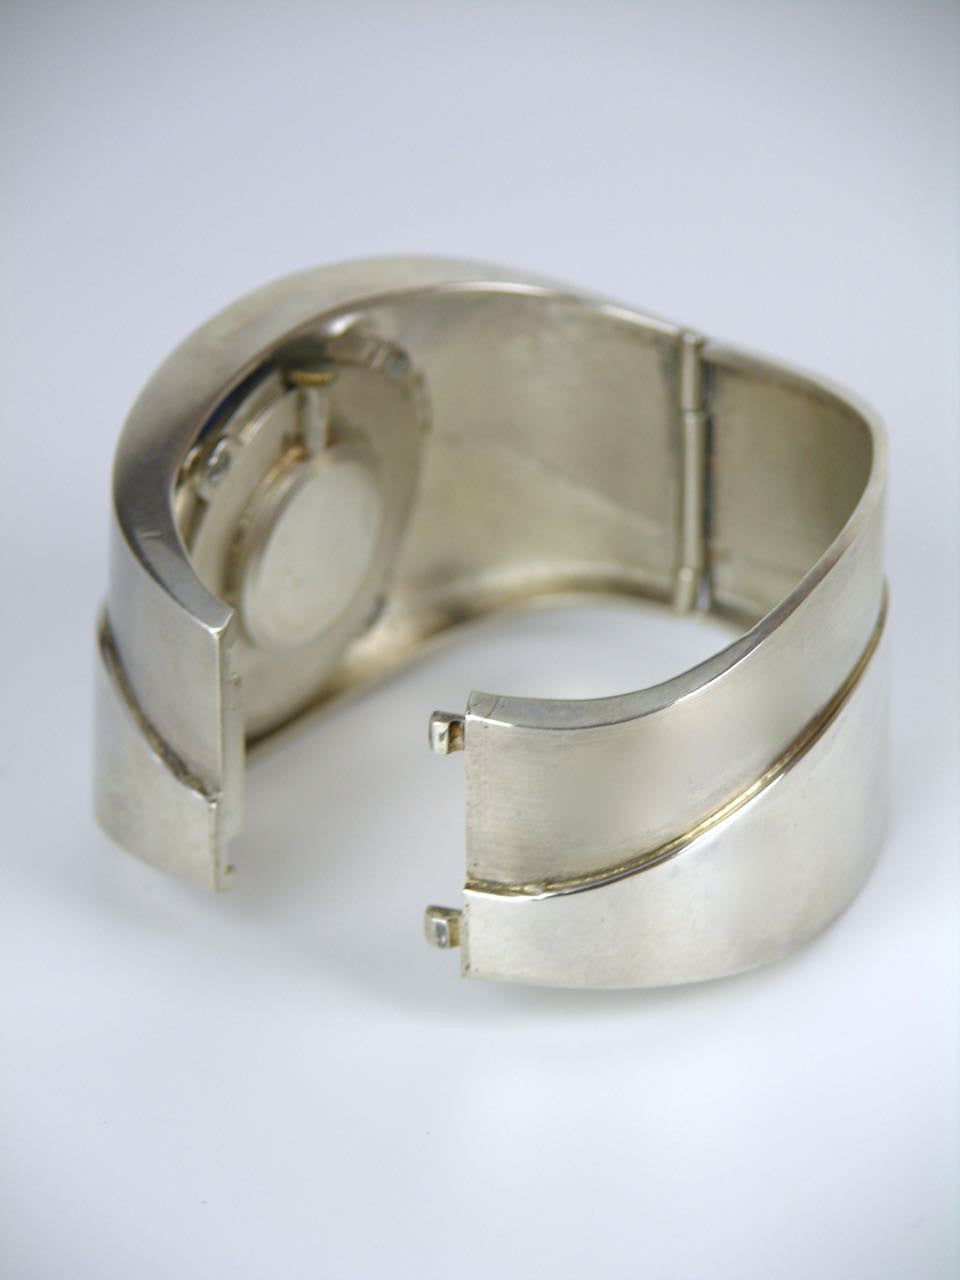 Heavy modernist silver hinged cuff watch by Relo of Austria